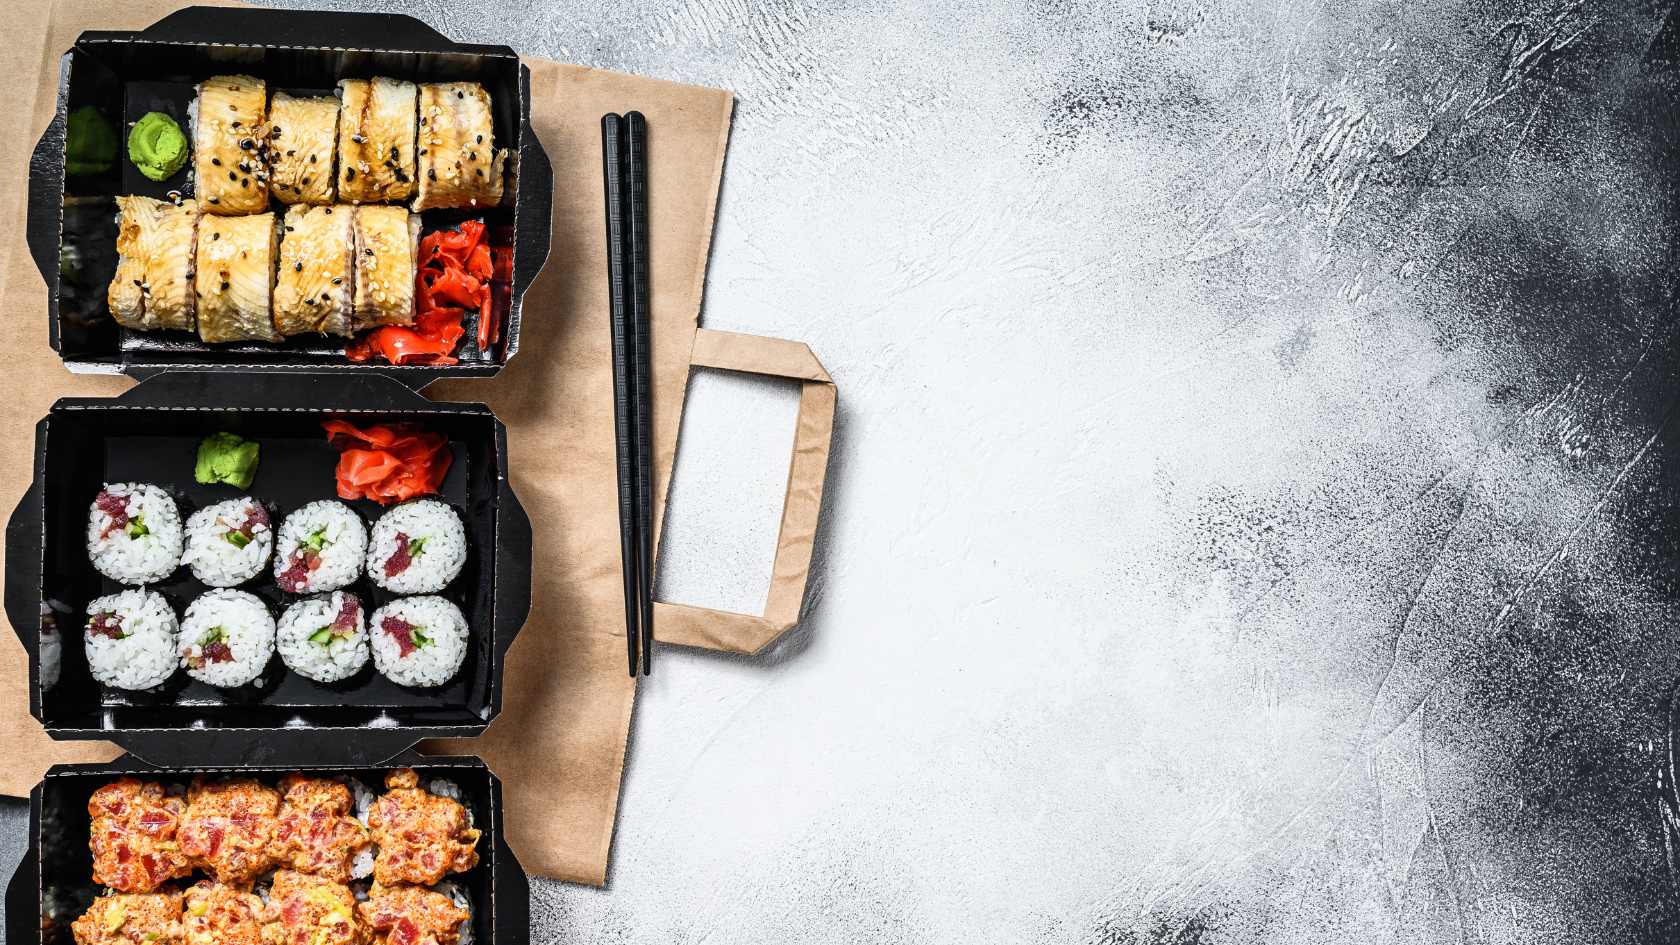 Reducing Waste with Reusable Takeout Containers